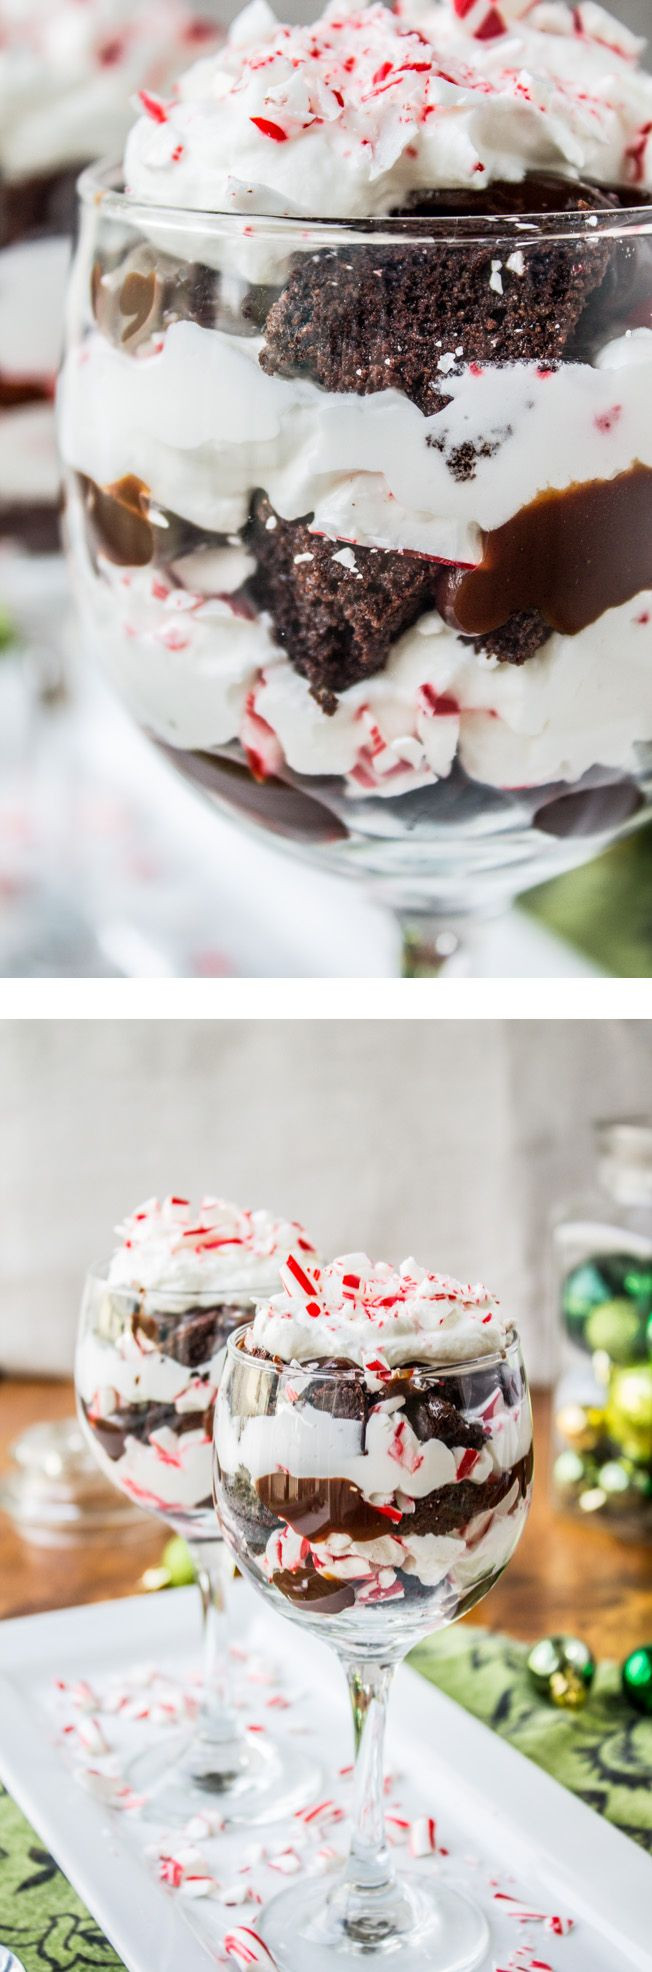 Holiday Desserts For Christmas
 16 Awesome Christmas Day Dessert Recipes